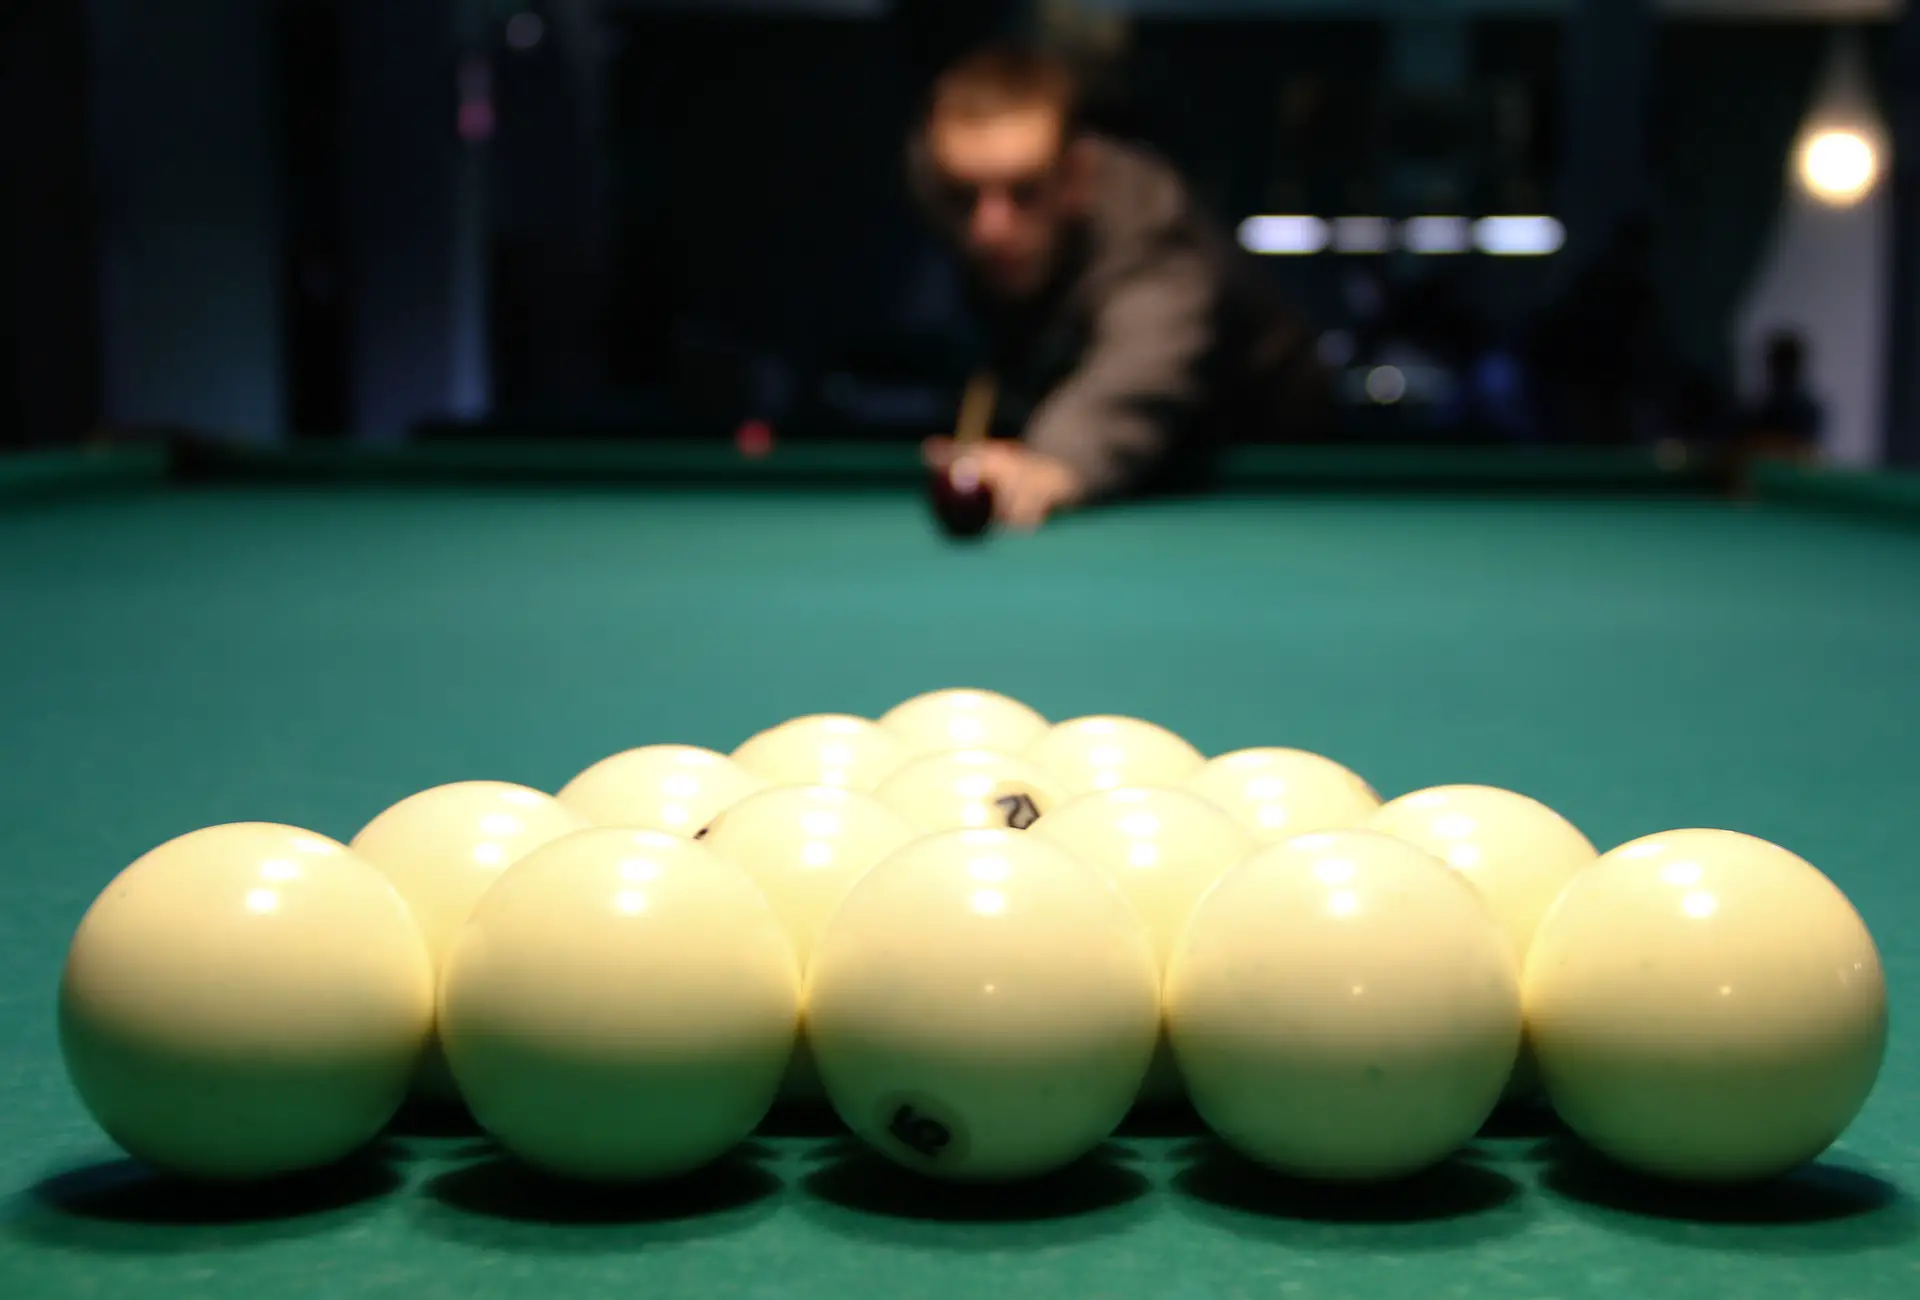 How To Play Pool By Yourself?